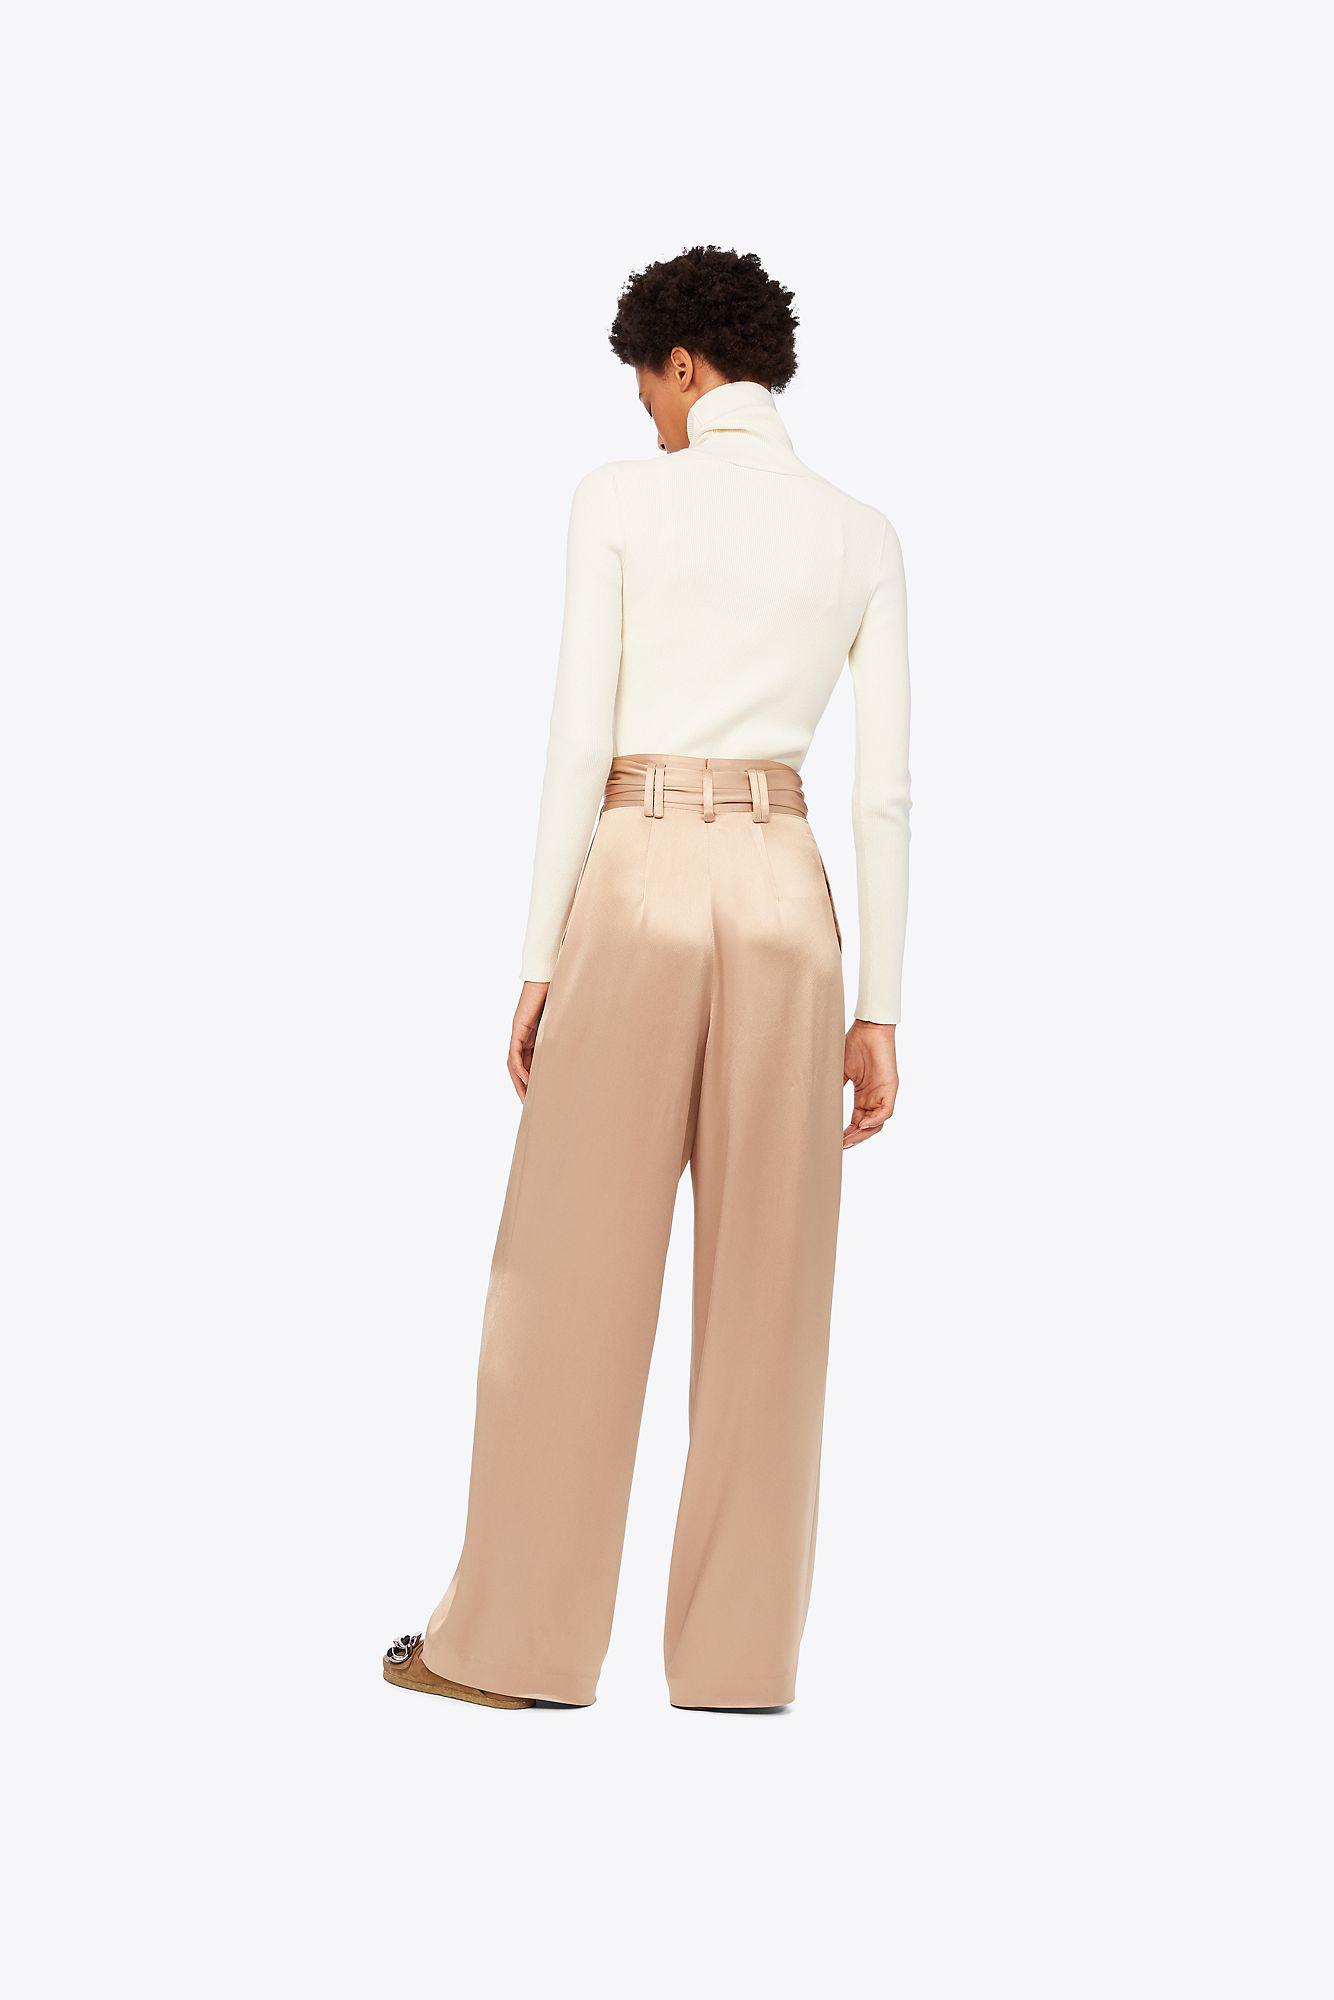 Tory Burch High-waisted Satin Pant in Natural | Lyst